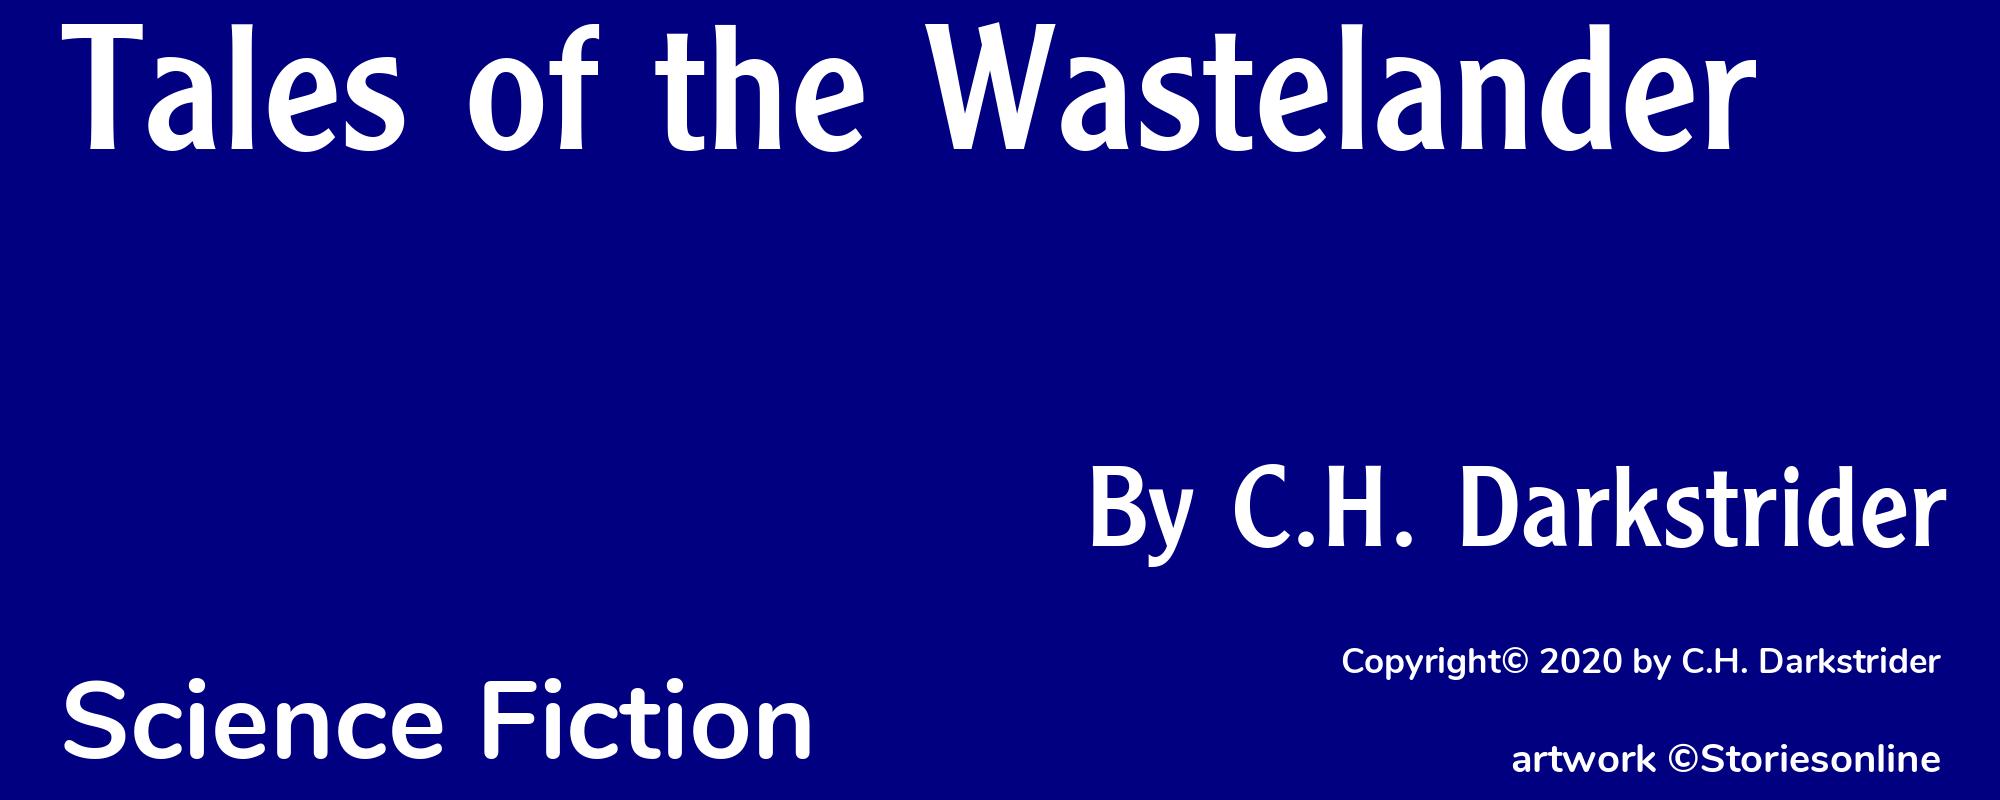 Tales of the Wastelander - Cover